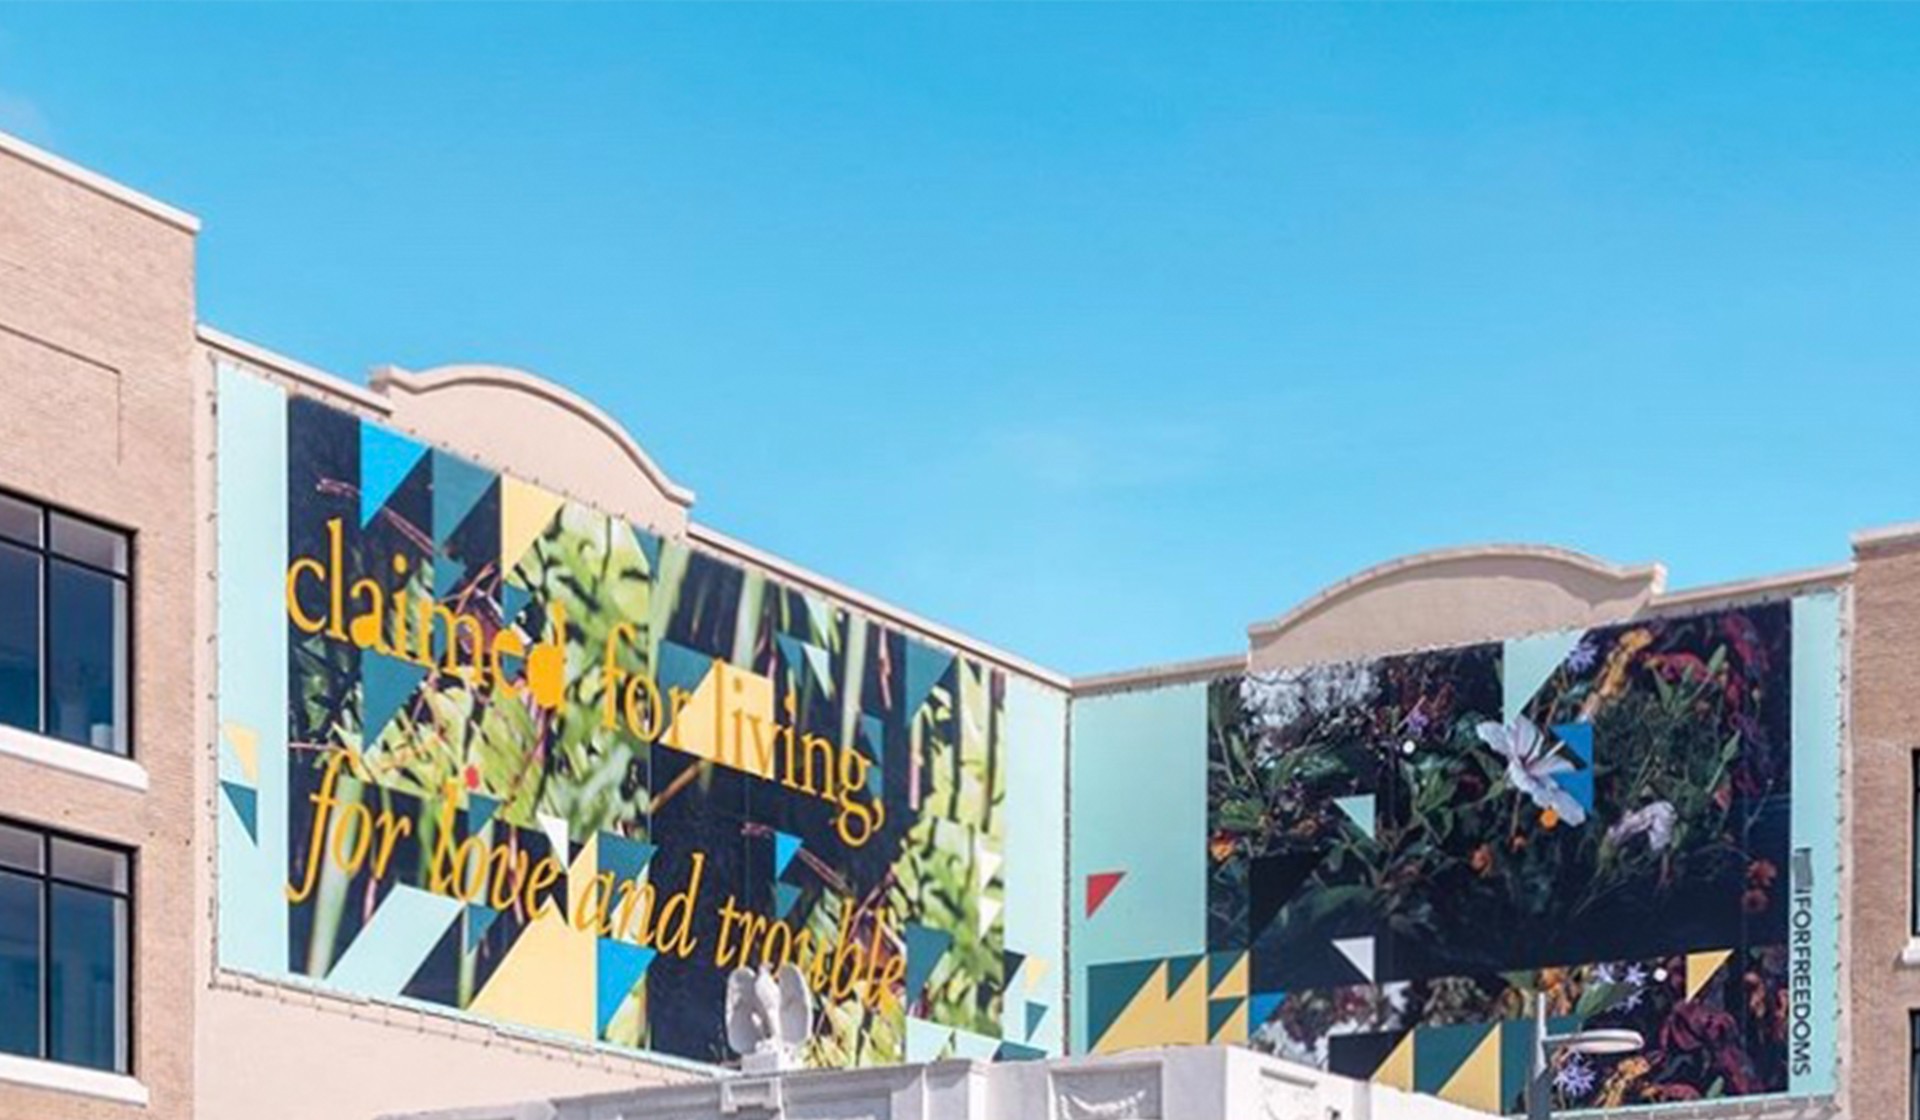 The Miami Design District Is Where Great Art, Architecture, Food And  Shopping Converge